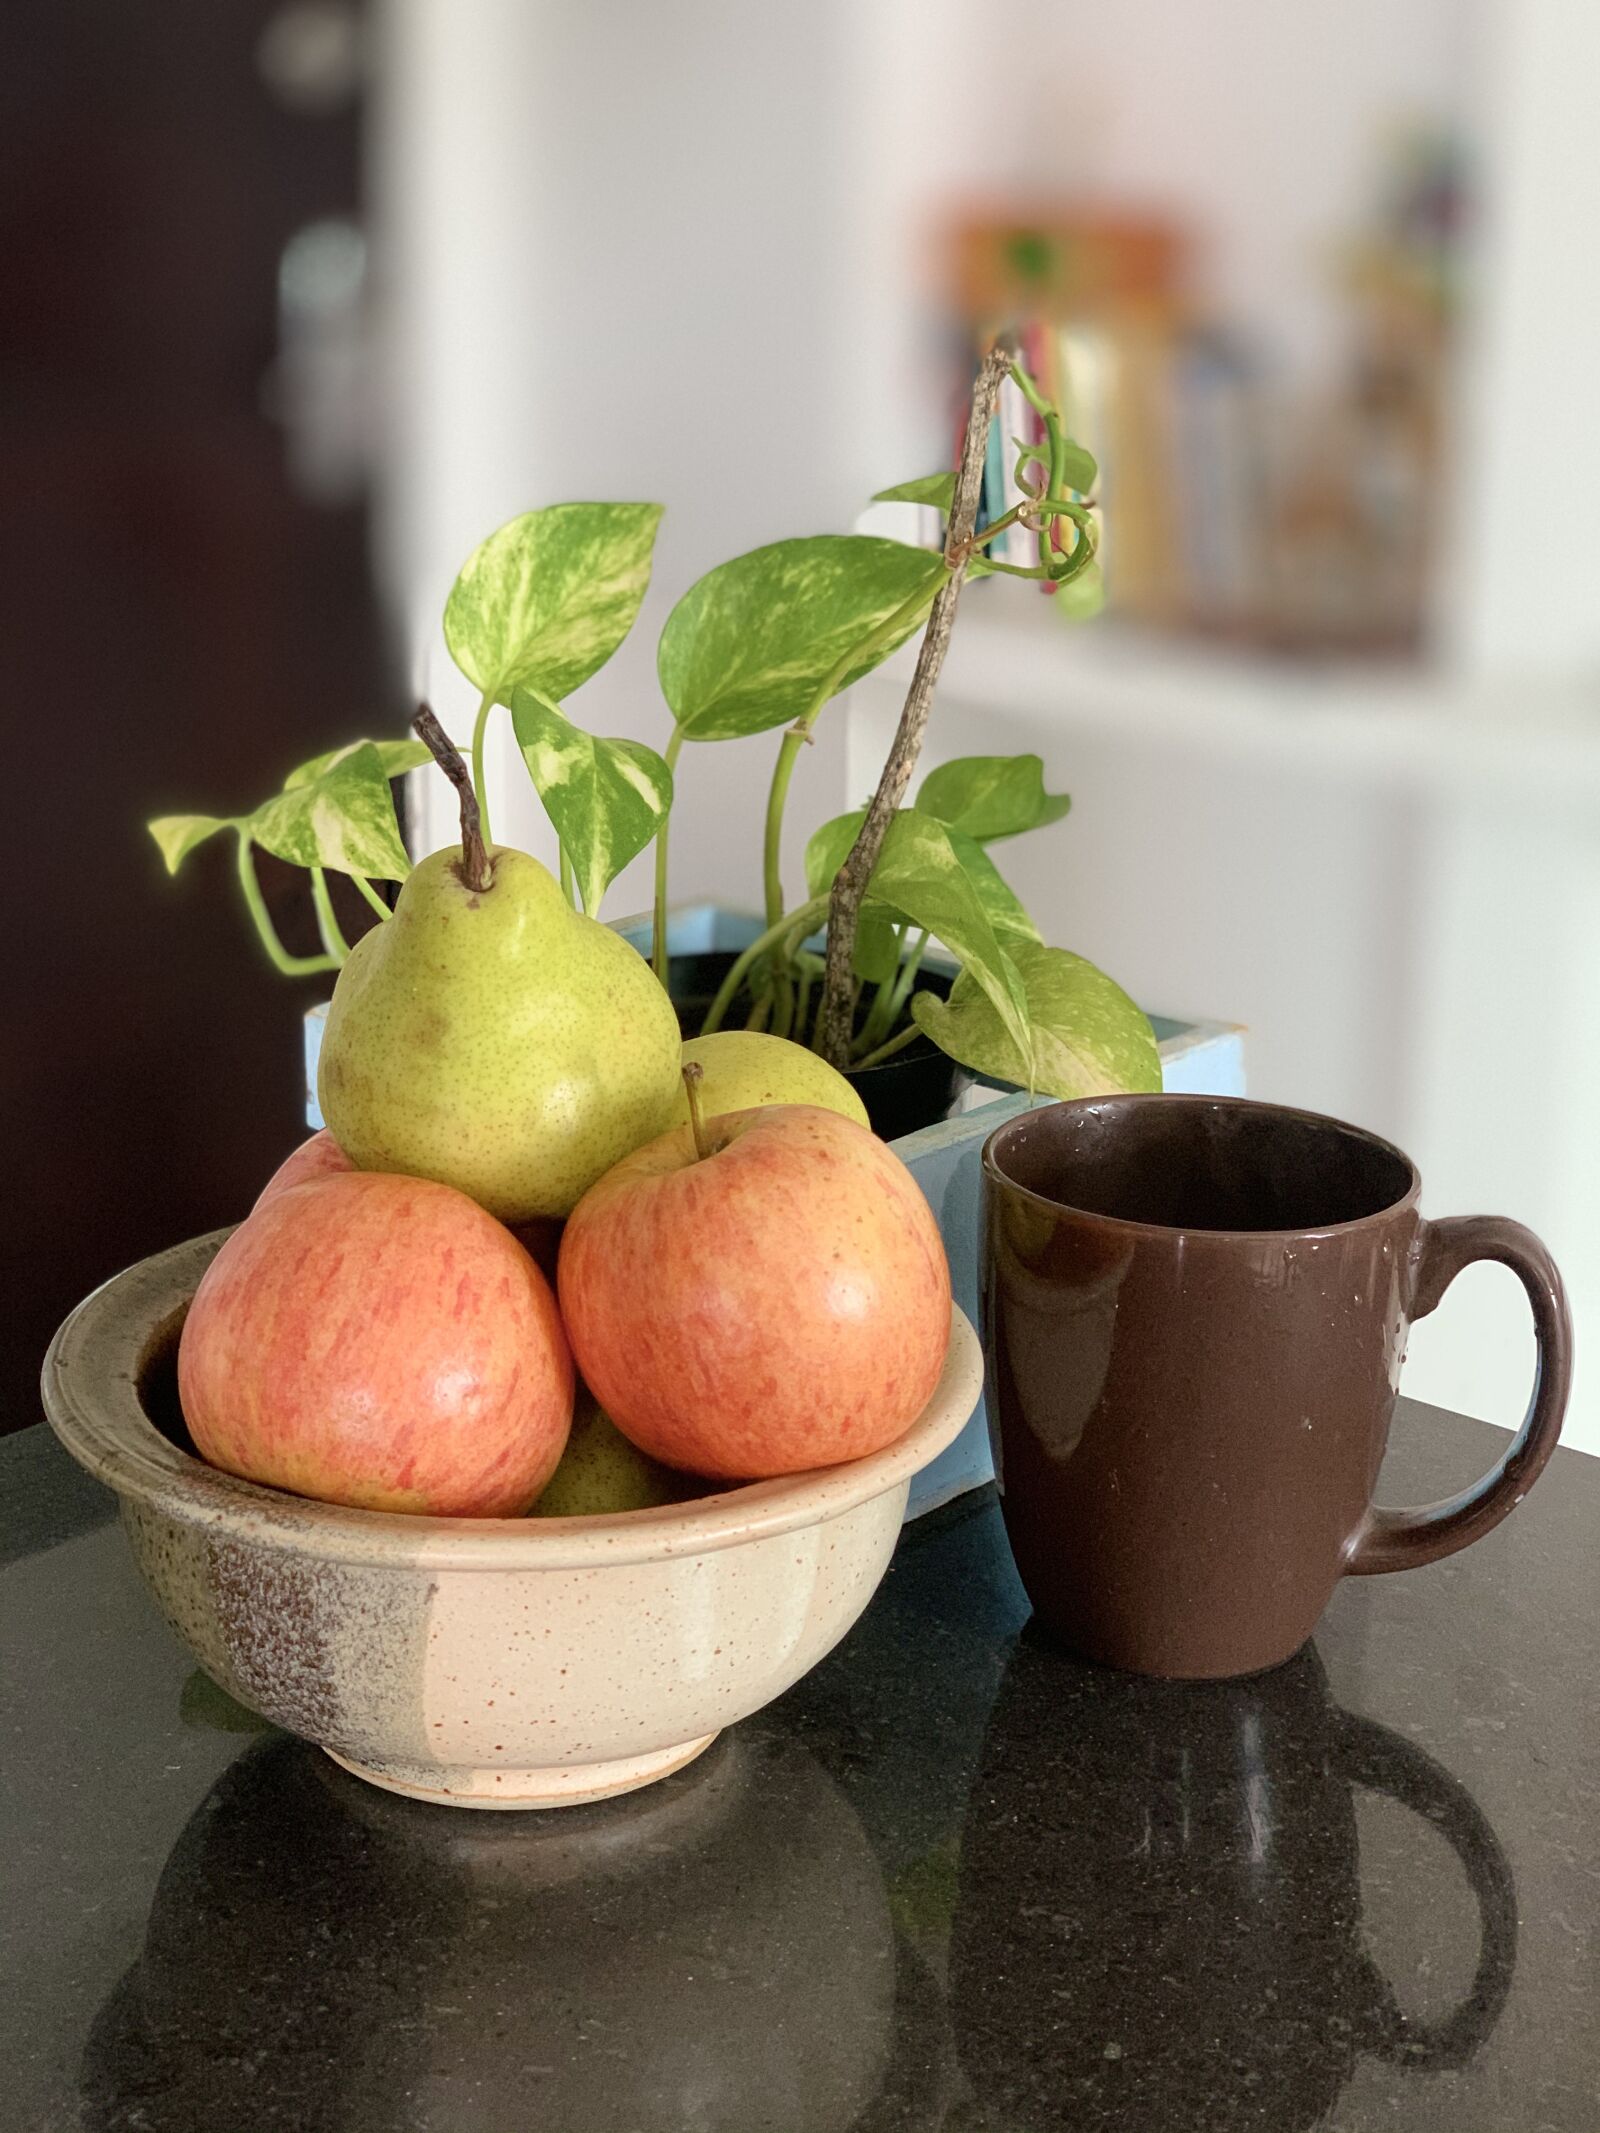 Apple iPhone XS sample photo. Apples, pears, pear photography